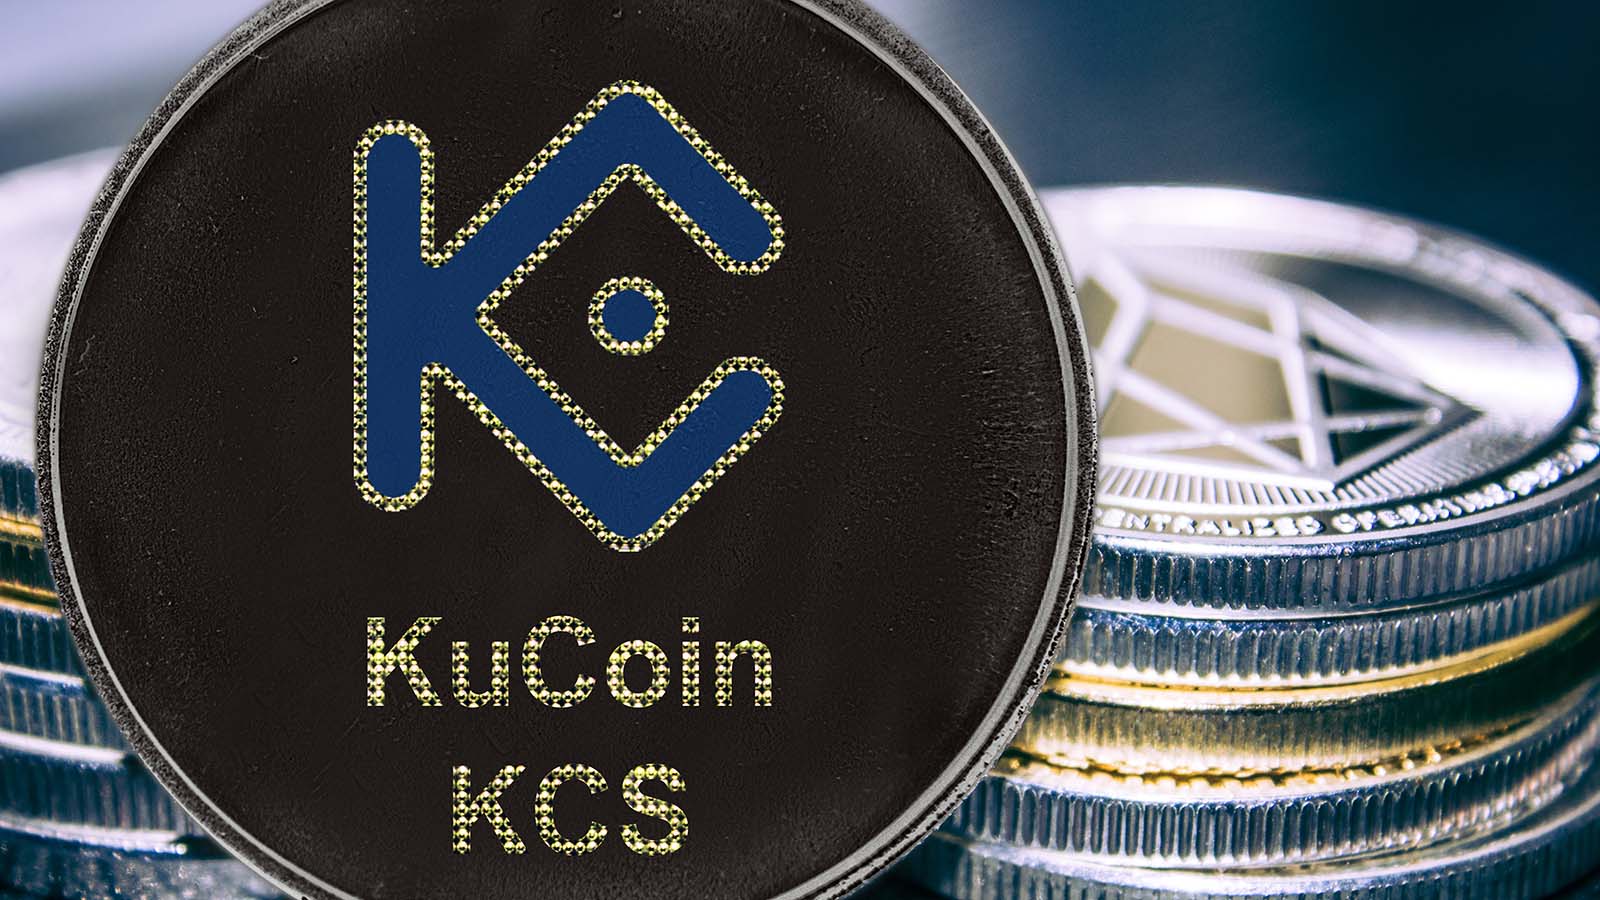 Kucoin Token Struggles To Hold Key Support At $8, How Low Can It Go?